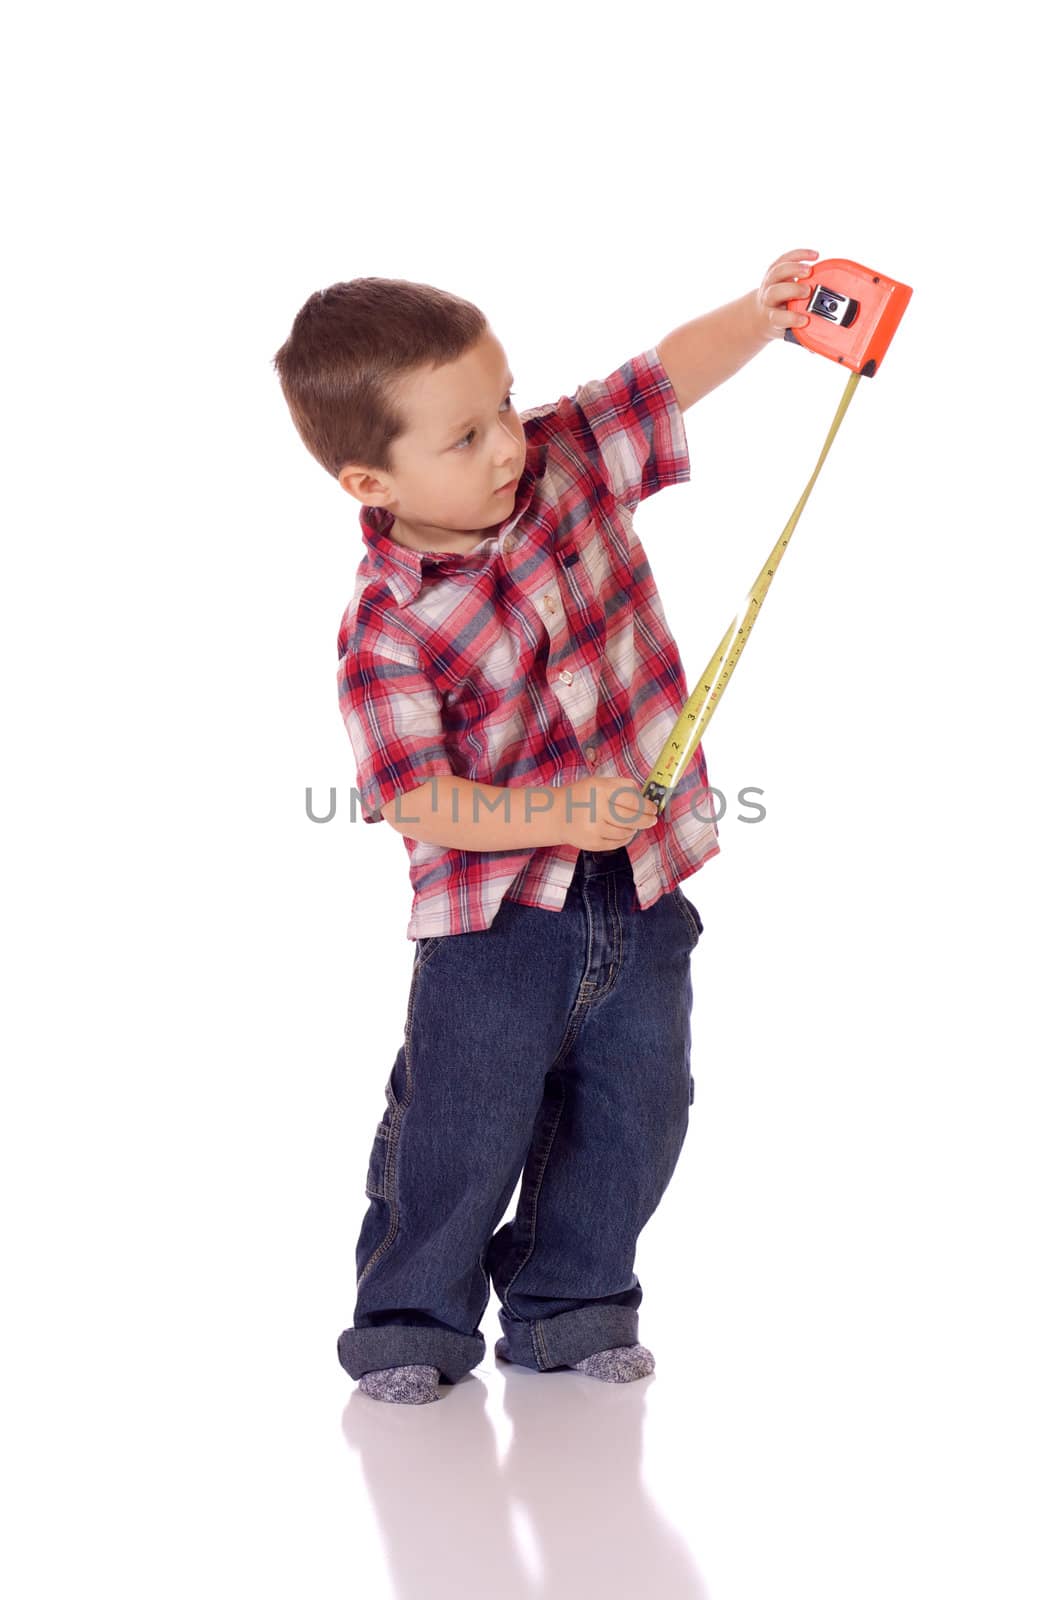 Cute little boy with a measuring tape